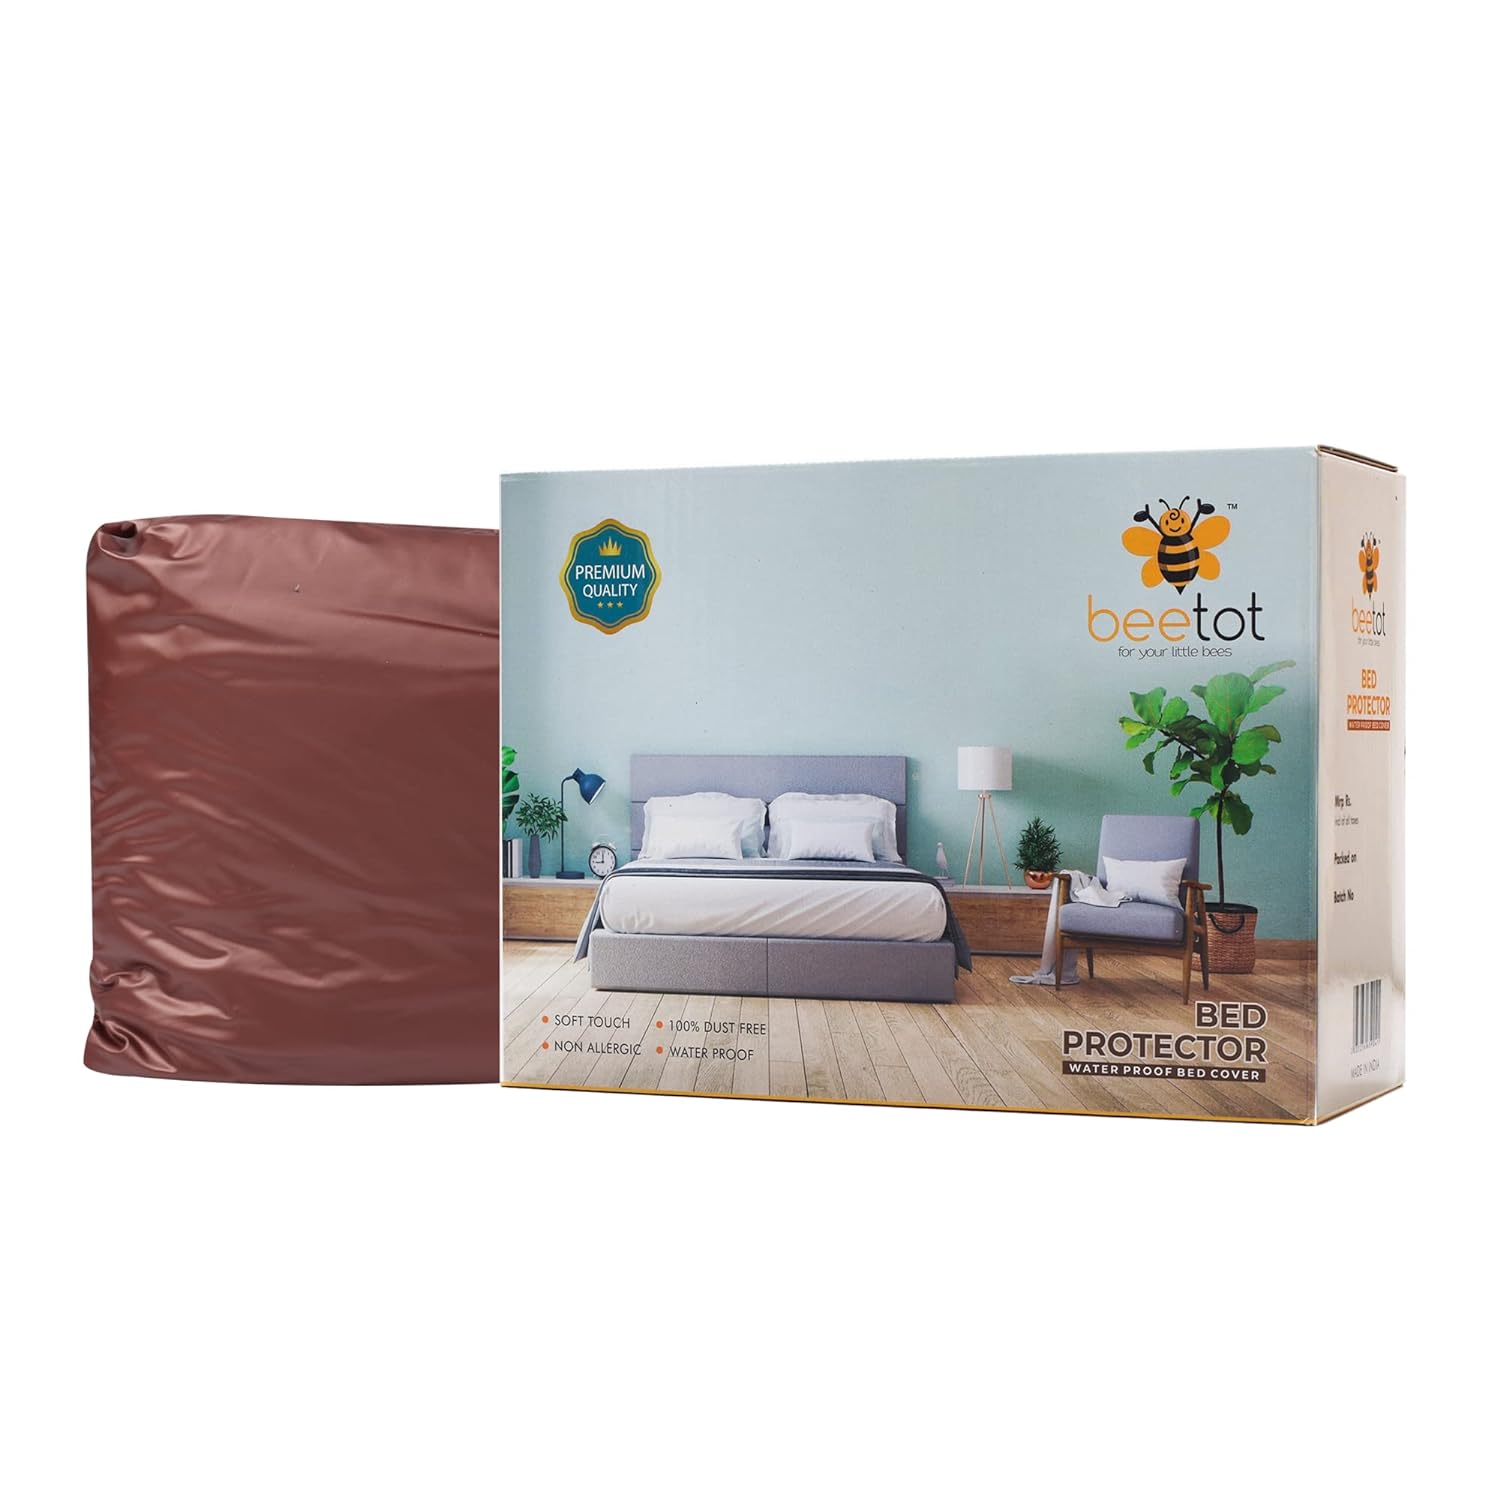 PVC Water Proof and Dust Proof Double Bed Cover, Mattress Protector, Non-Toxic Bed Protector, Mattress Cover (Brown)